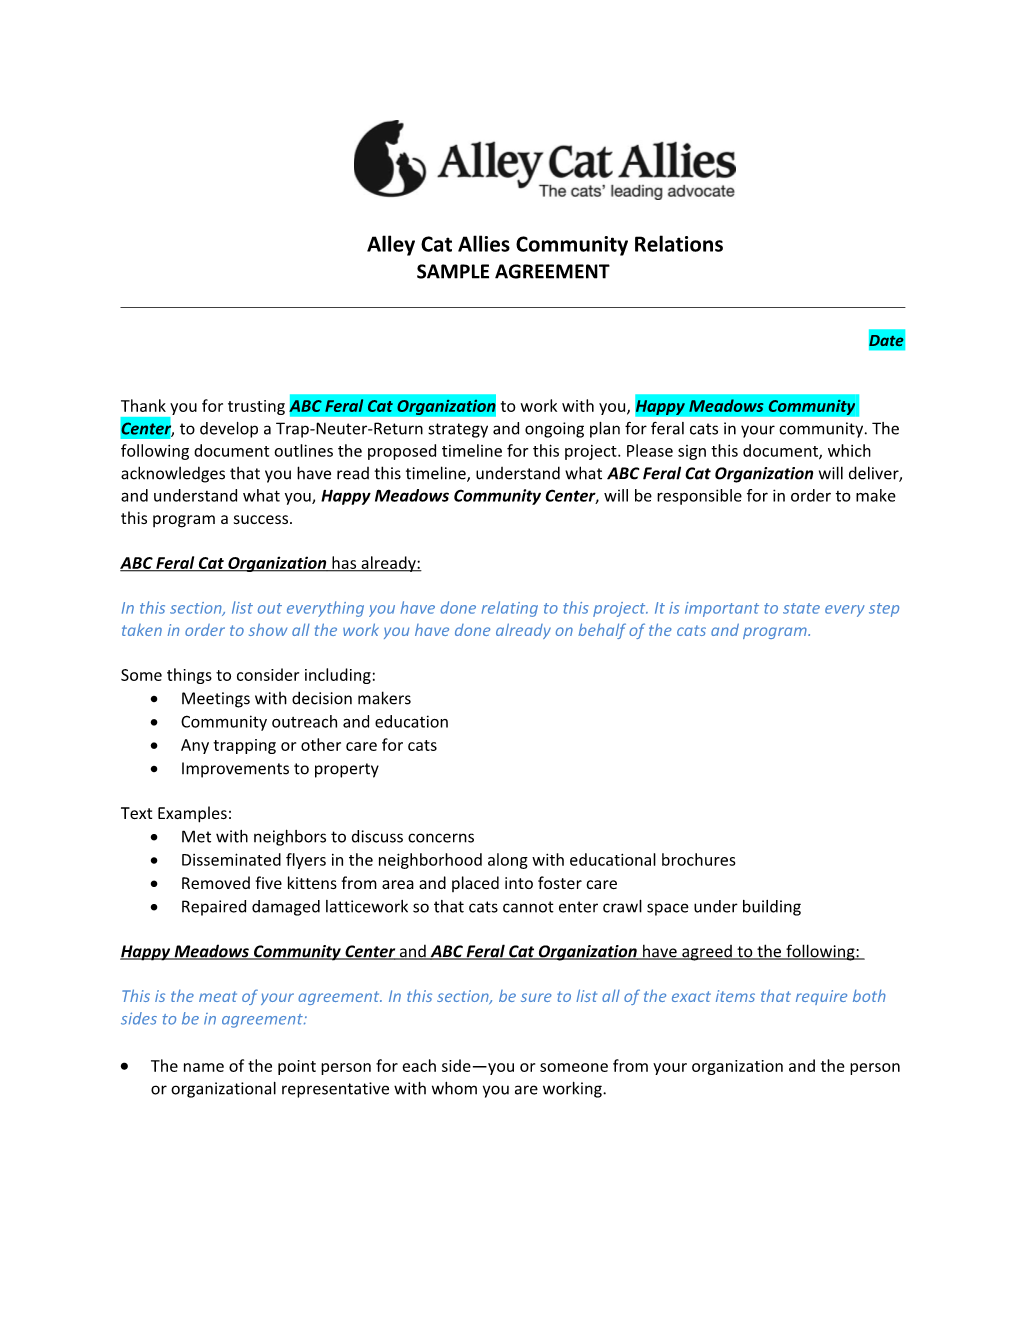 Alley Cat Allies Community Relations